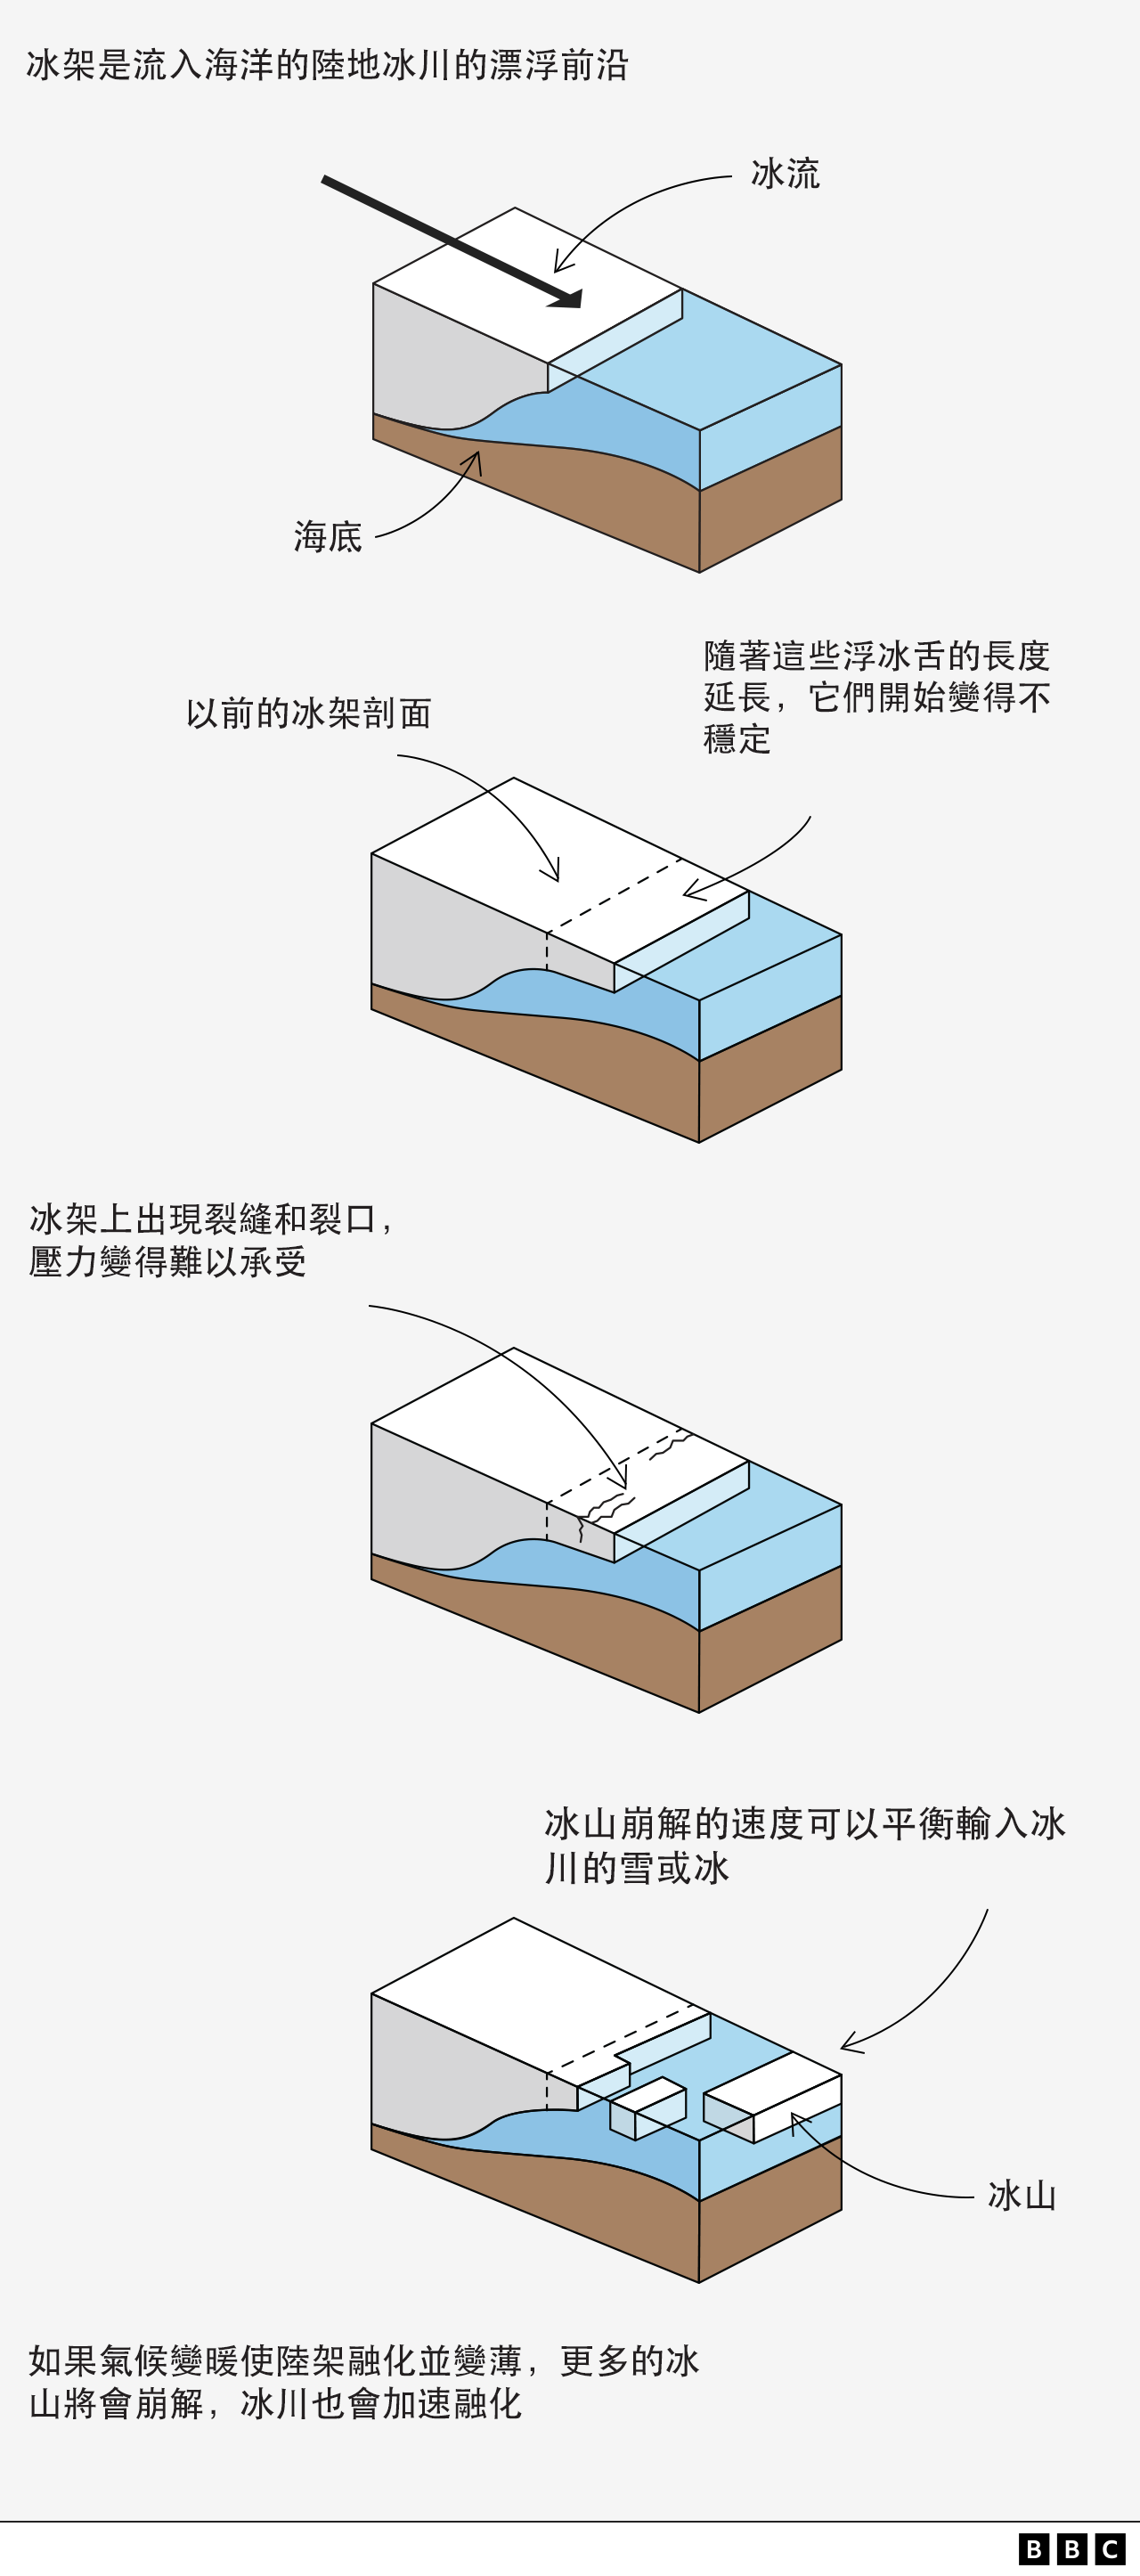 Illustrating ice calving: the breaking of ice chunks from the edge of a glacier, forming an iceberg.